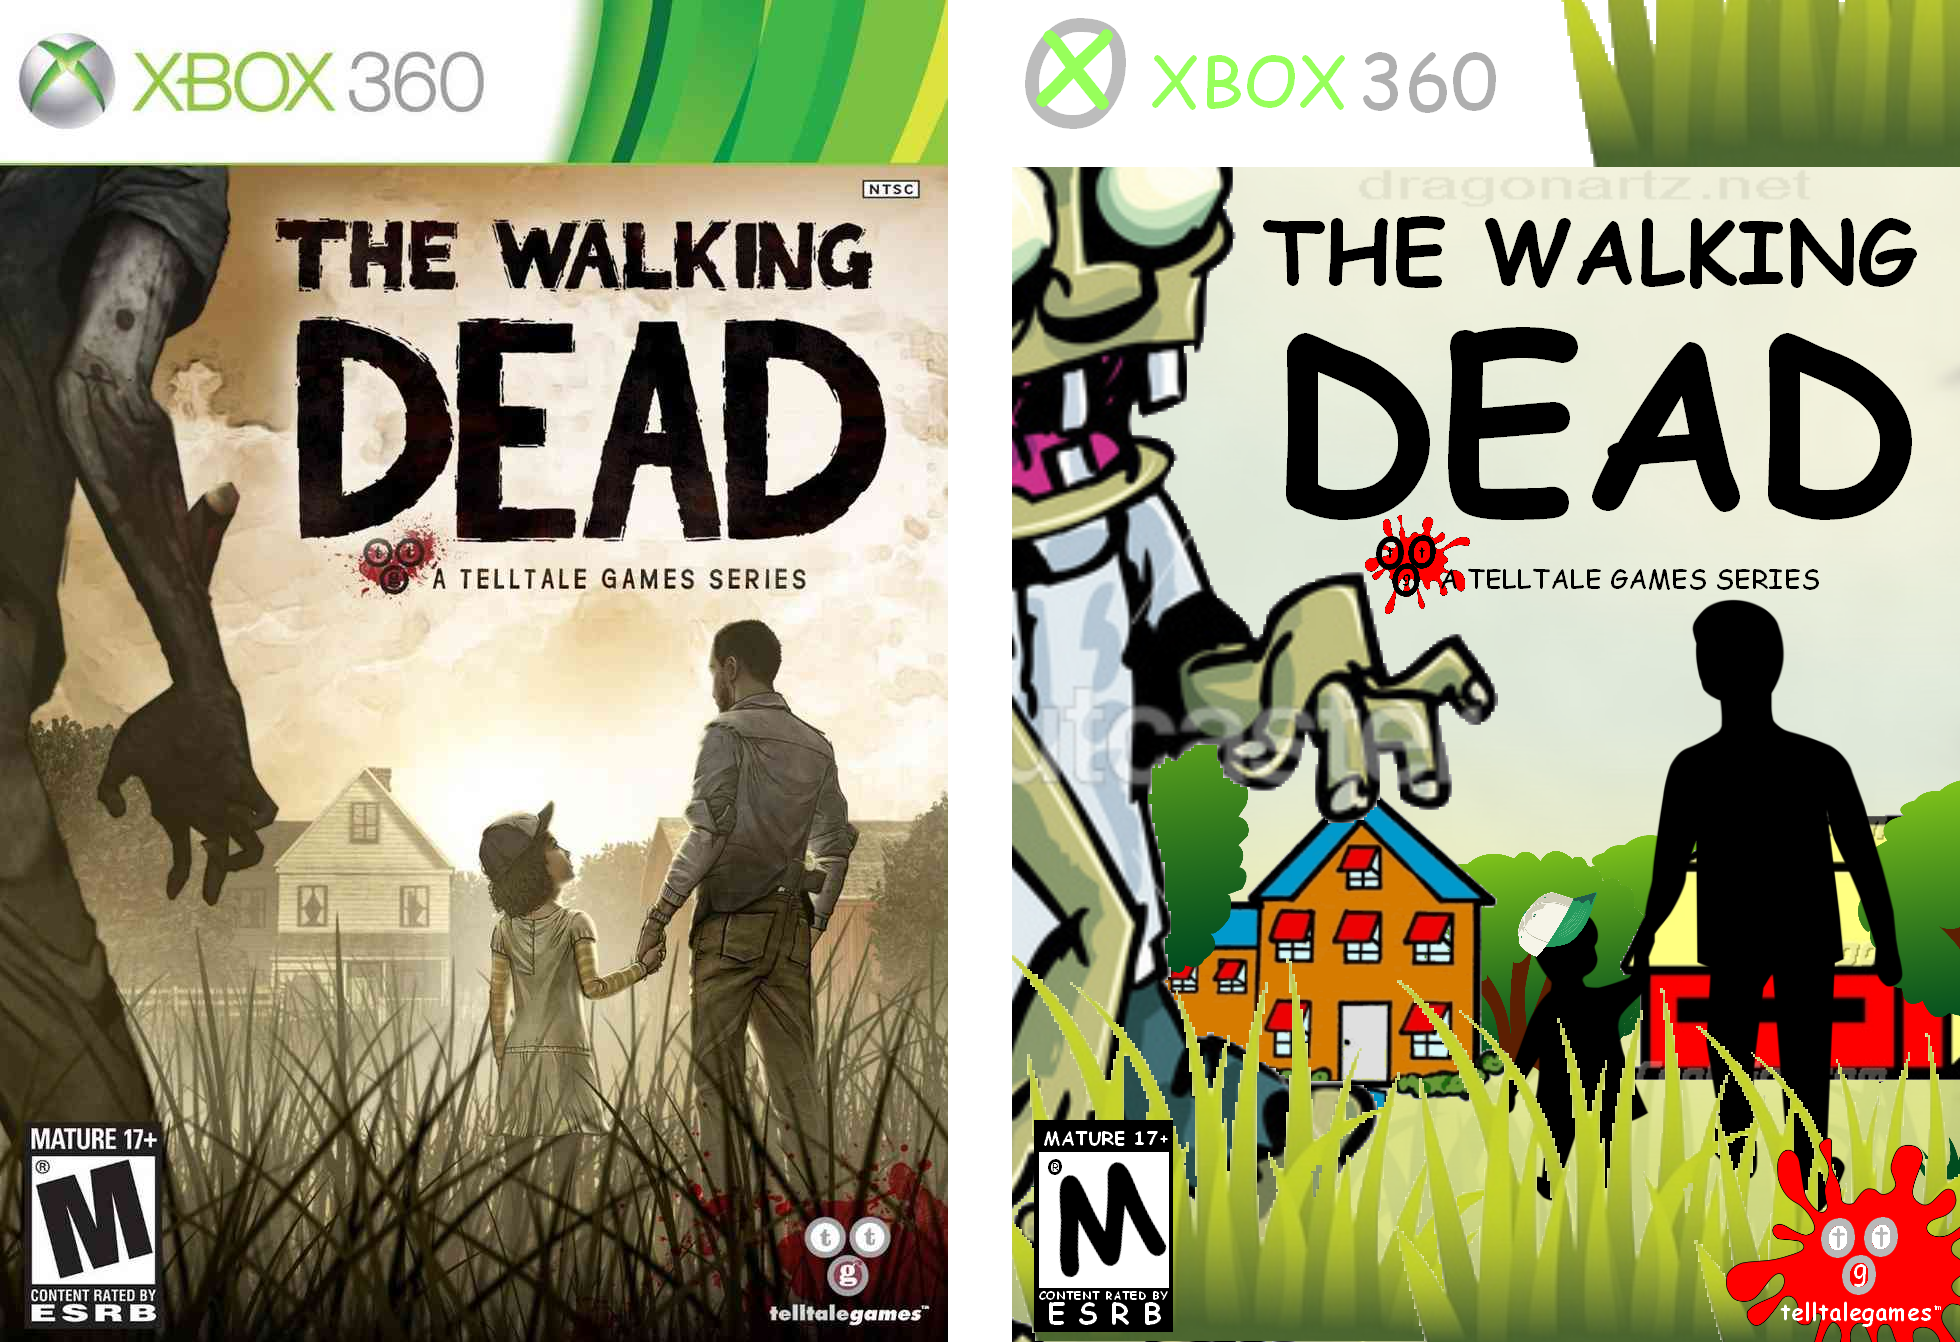 The Walking Dead Clipart   Clip Art Covers   Know Your Meme